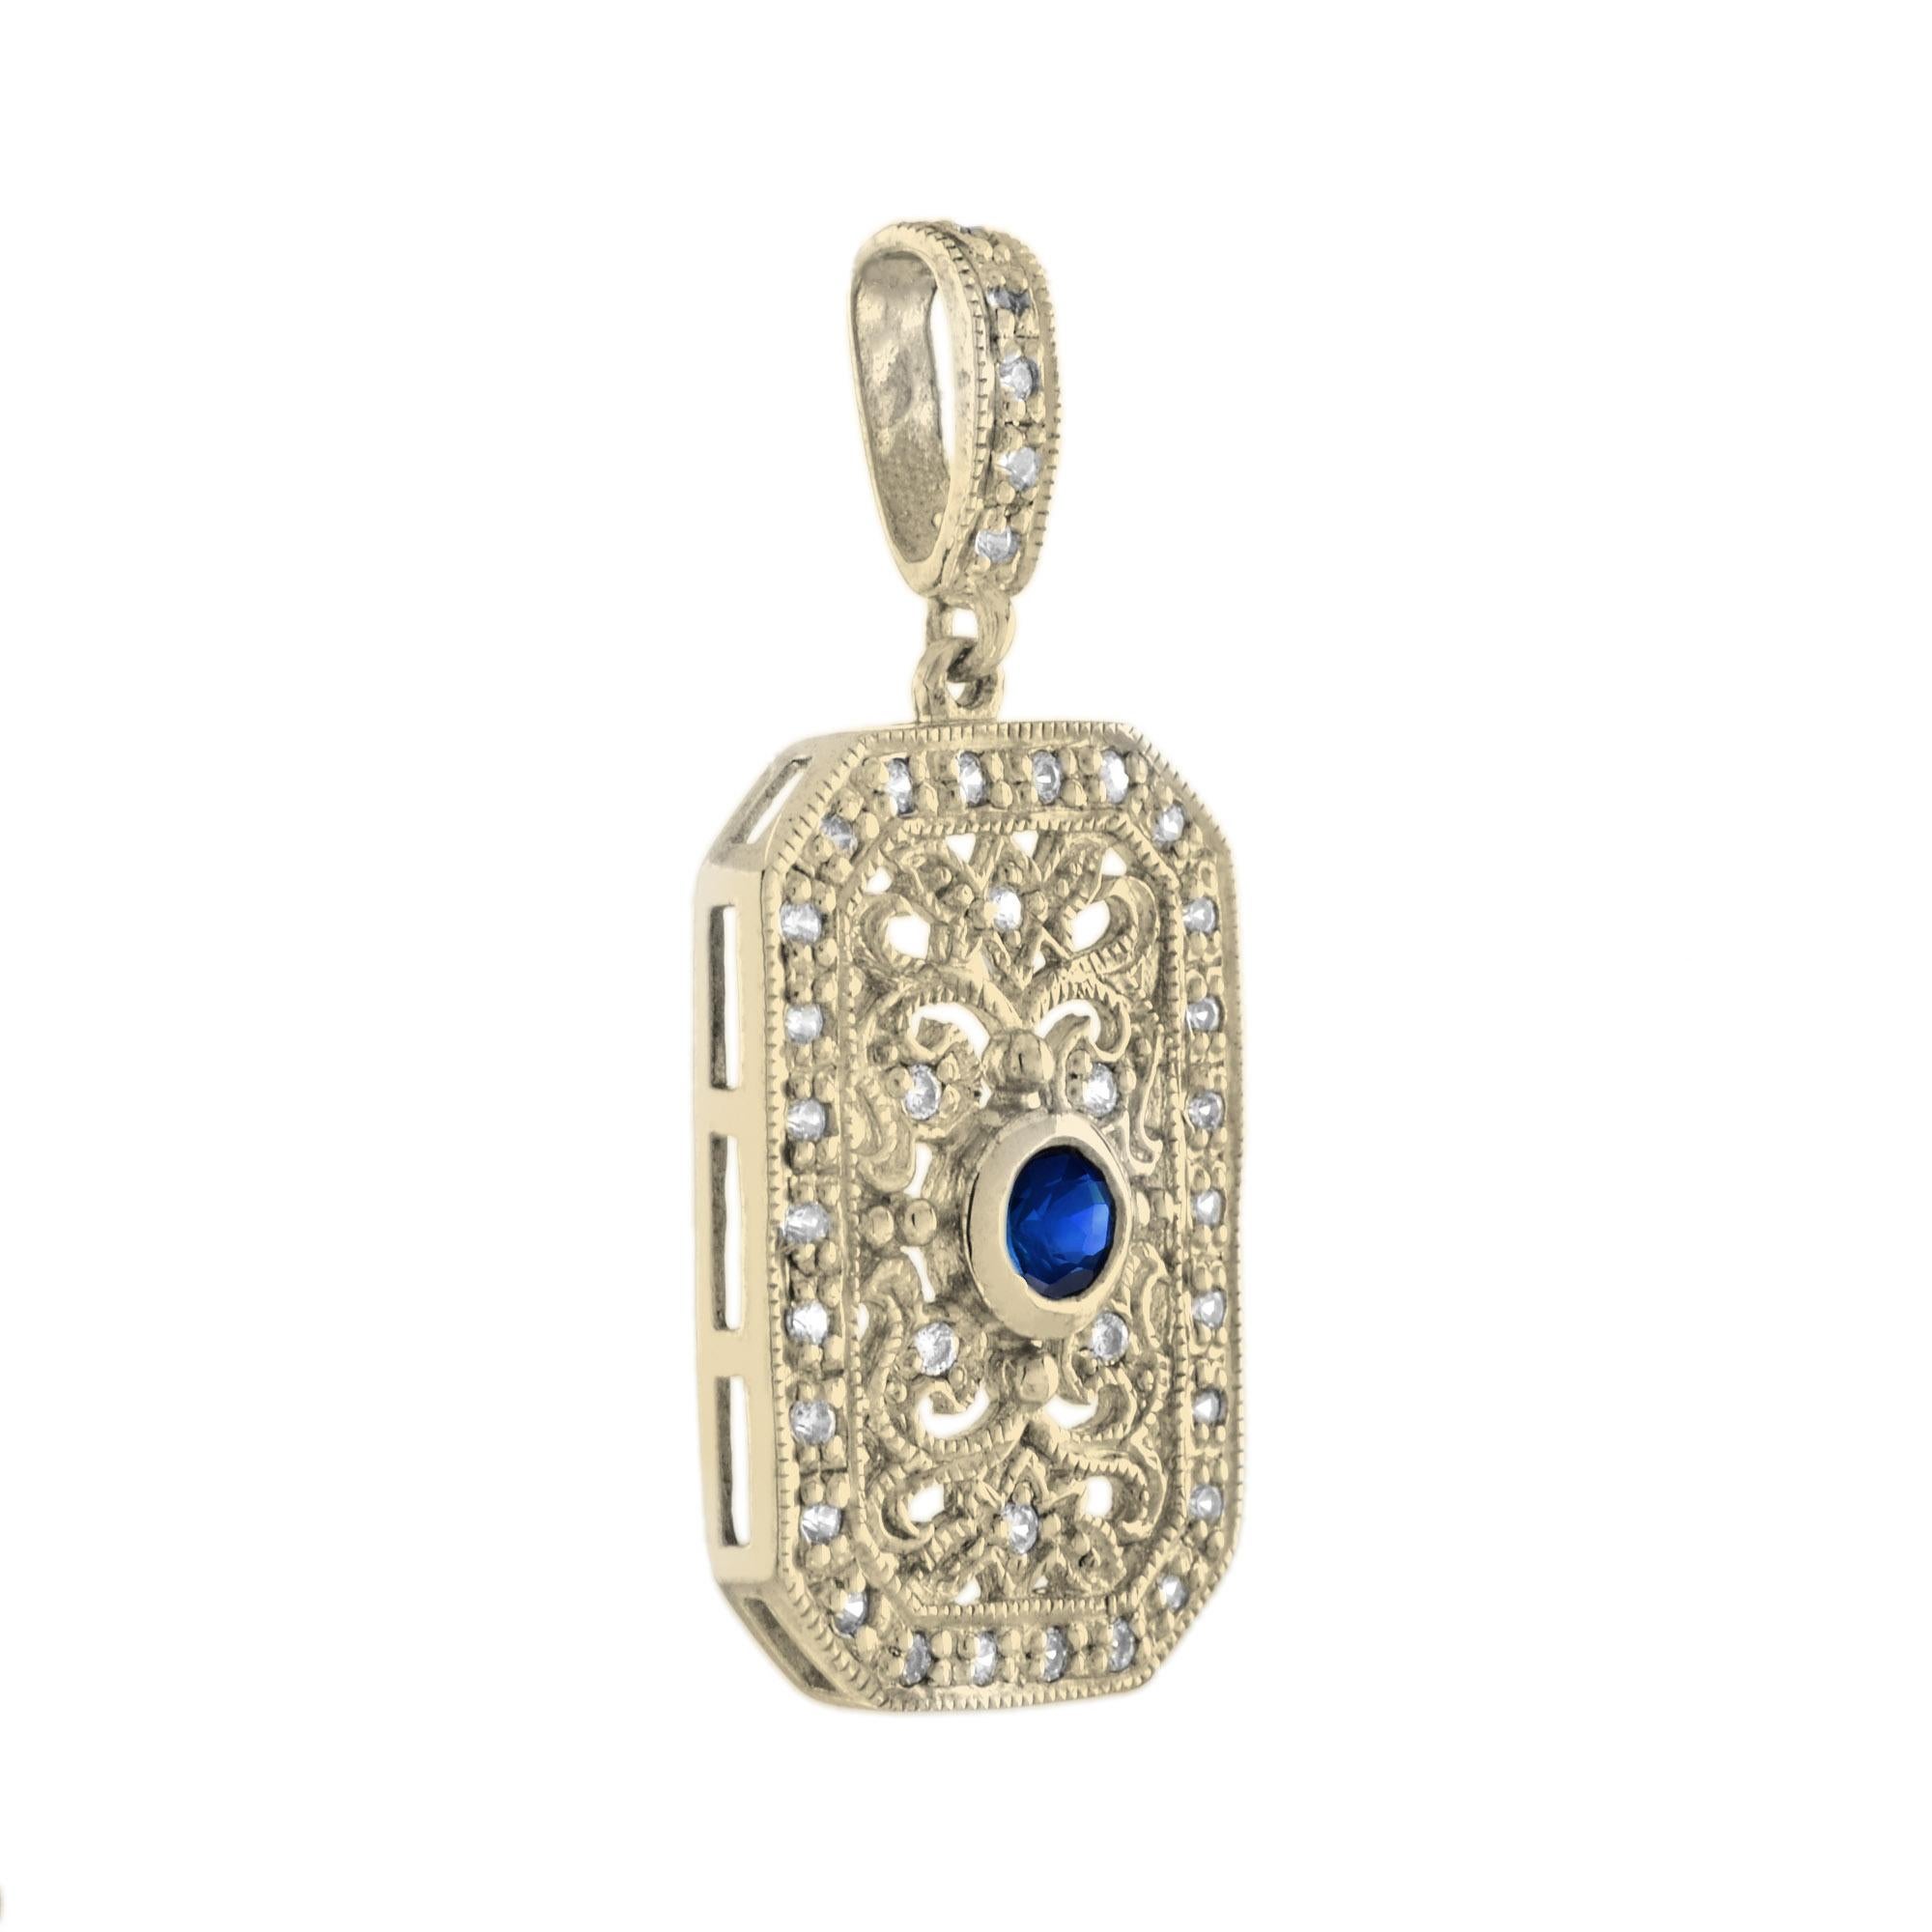 Featuring a 0.09 carat blue sapphire at the center and an ornate, vintage inspired design, this pendant is fit for any outfit. The colorful center stone is accented by sparkling round cut white diamonds that total 0.19 carats set on a 14k yellow